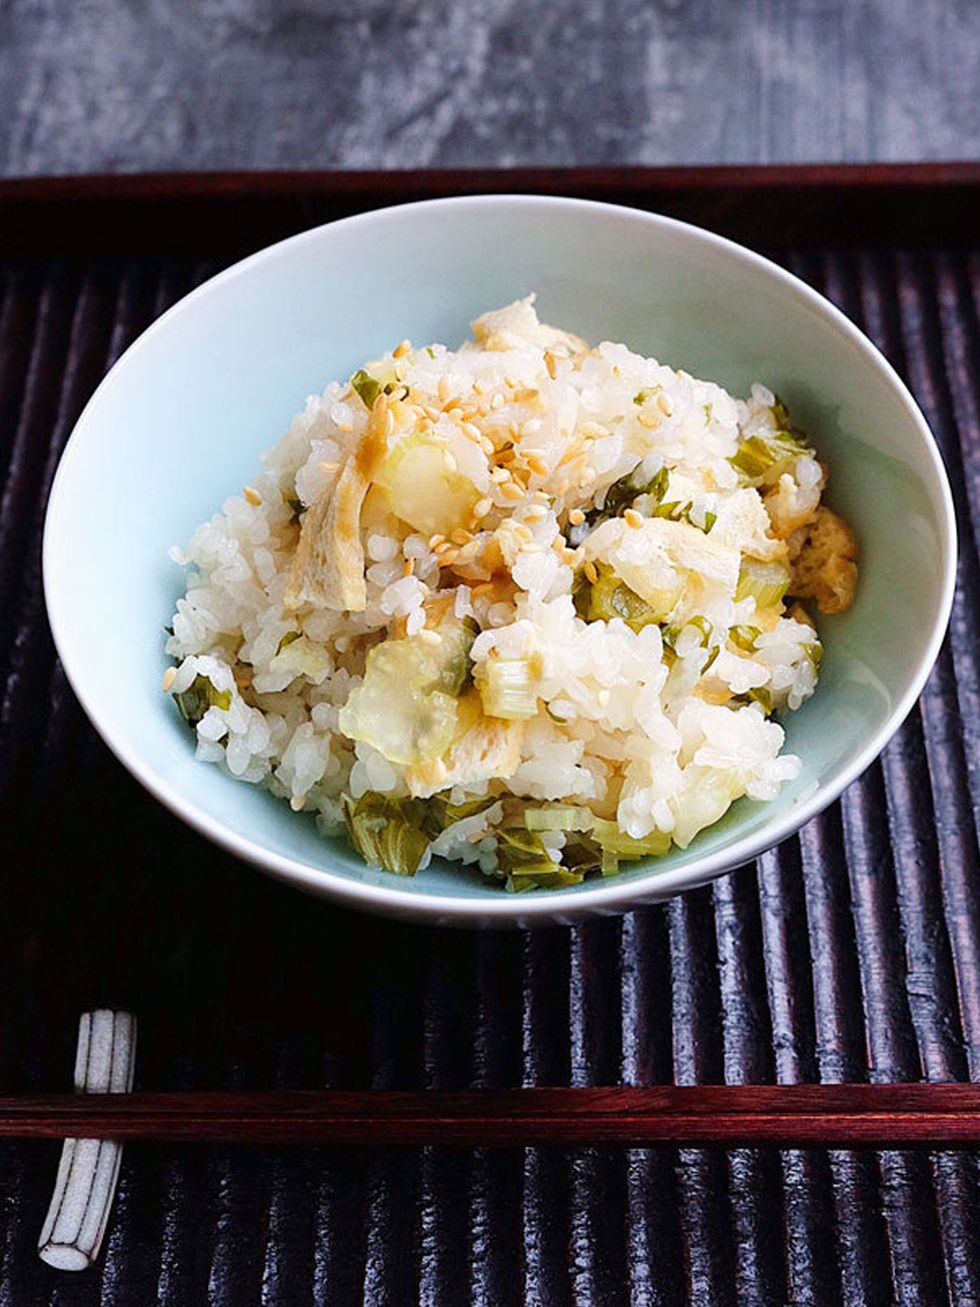 Dish, Cuisine, Food, Ingredient, Steamed rice, Rice, Jasmine rice, Risotto, Staple food, Produce, 